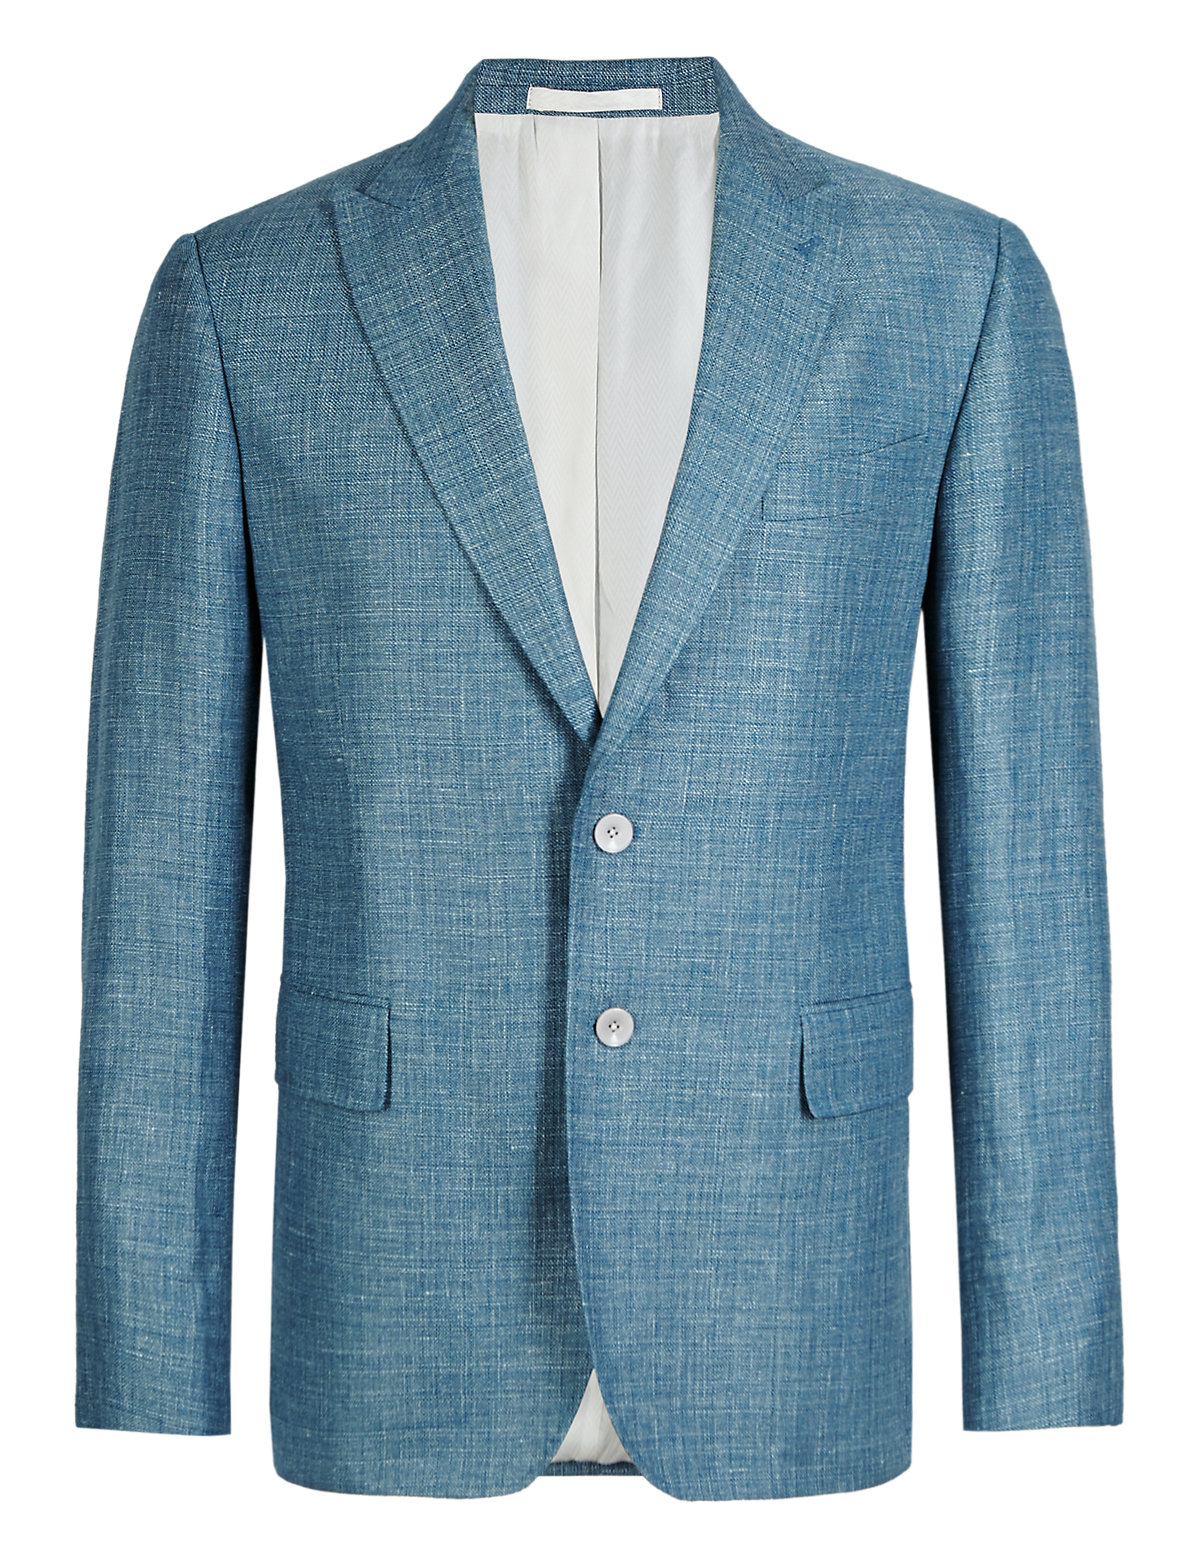 Linen Blend Tailored Fit 2 Button Textured Jacket with Wool